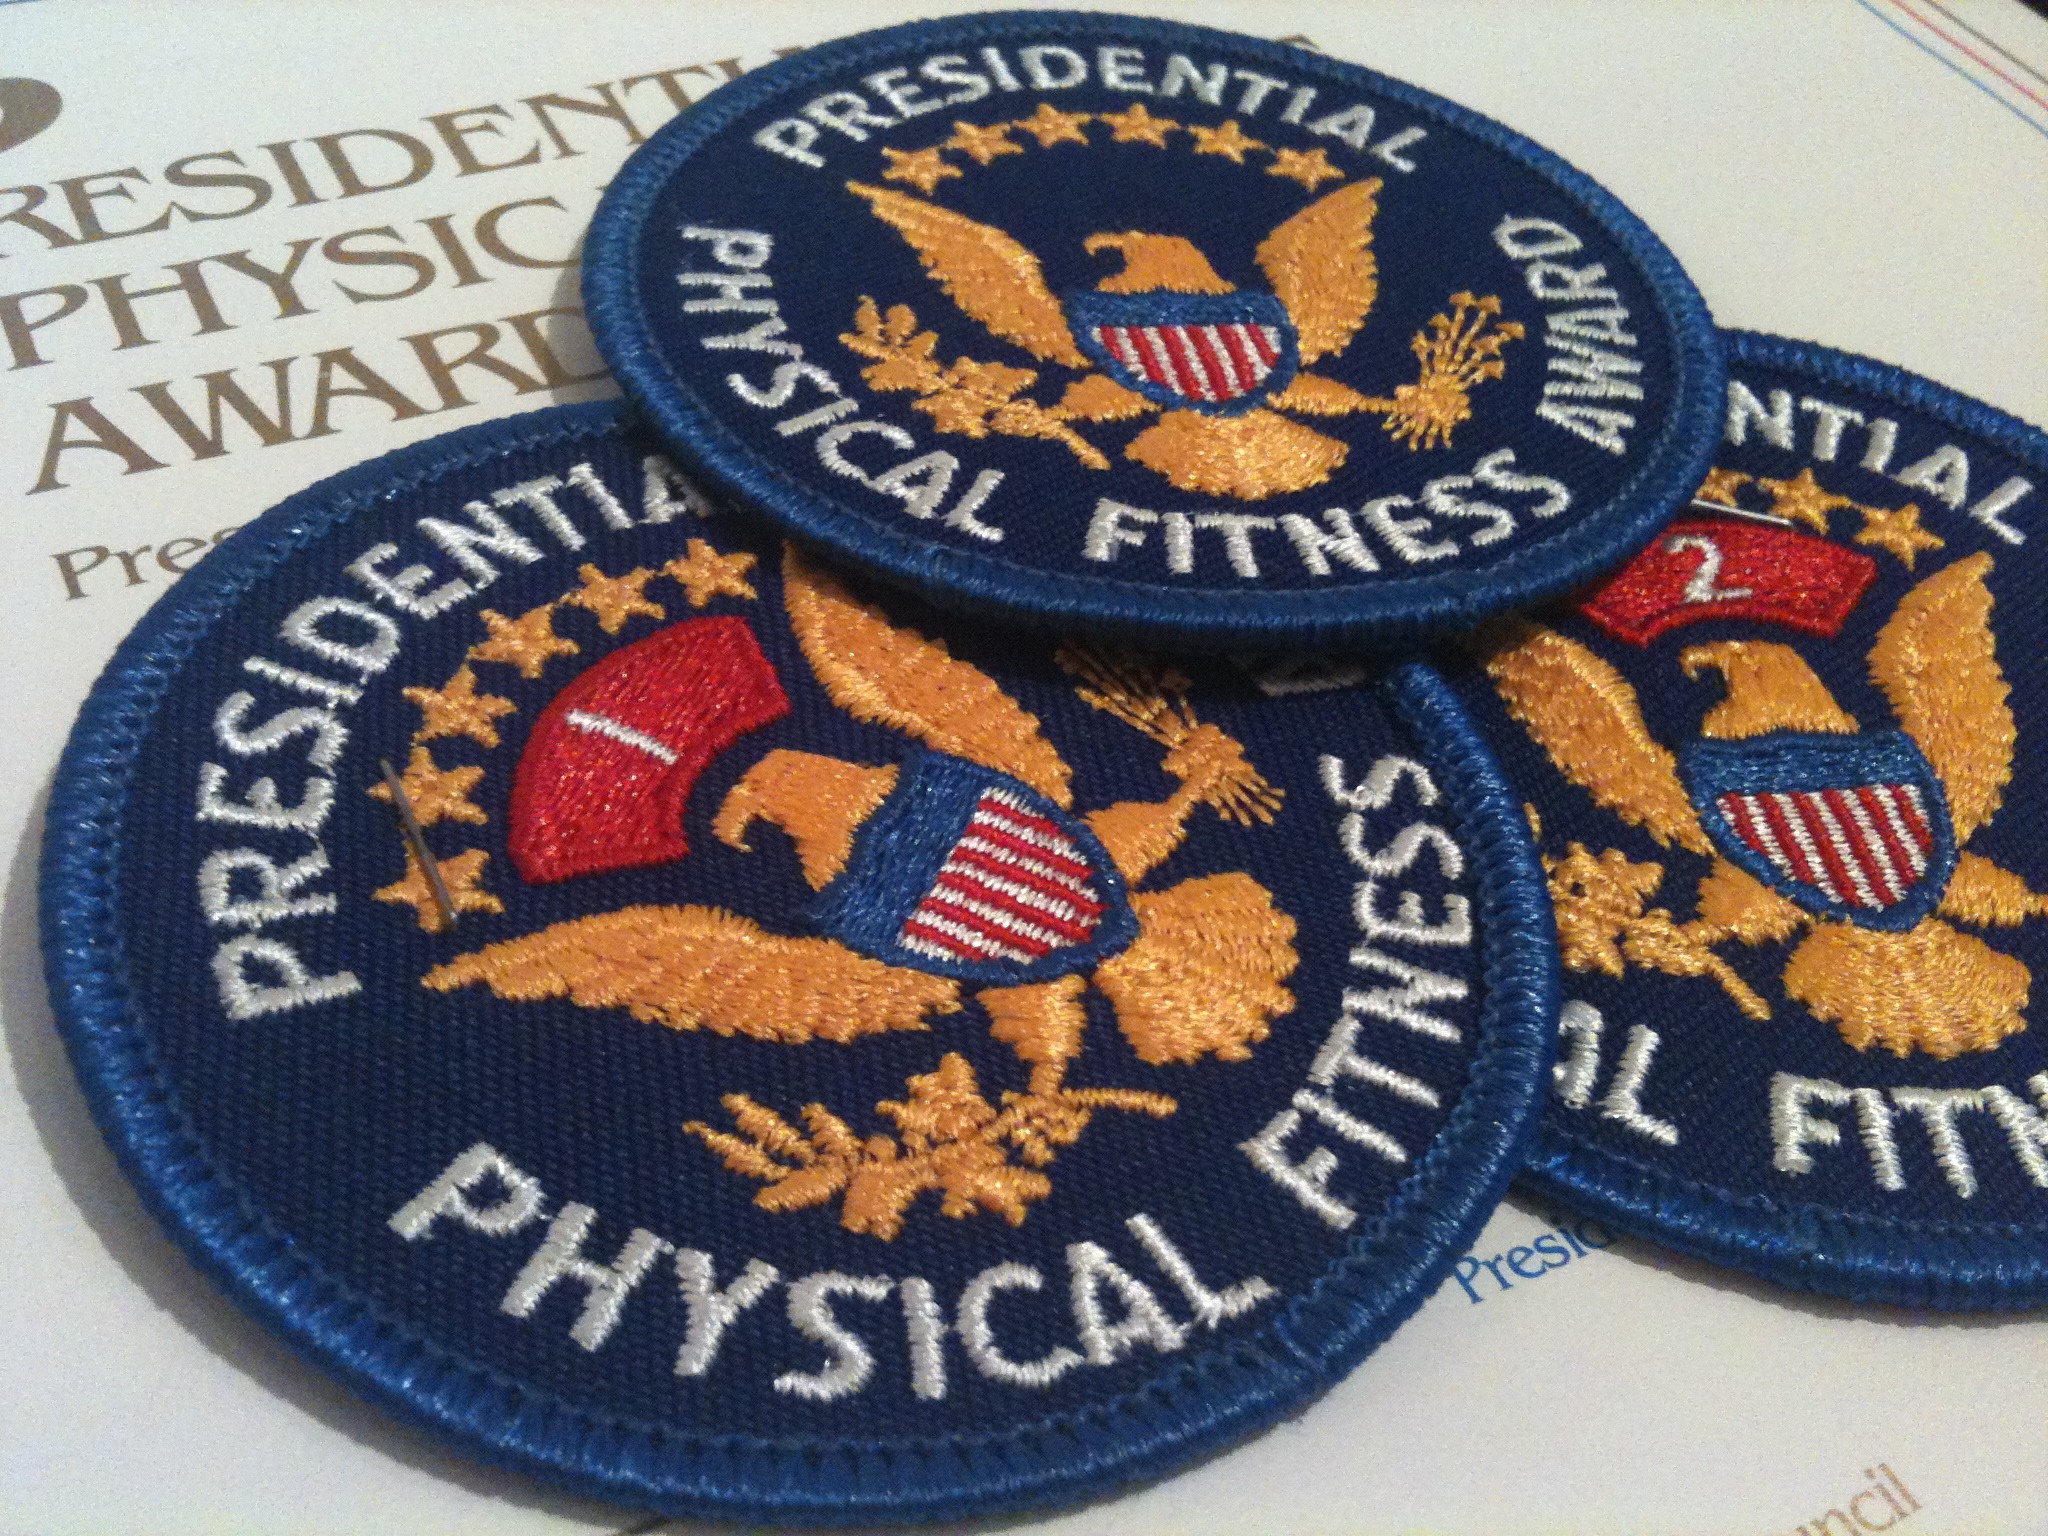 2048x1536 Seal of the Presidential Fitness Award